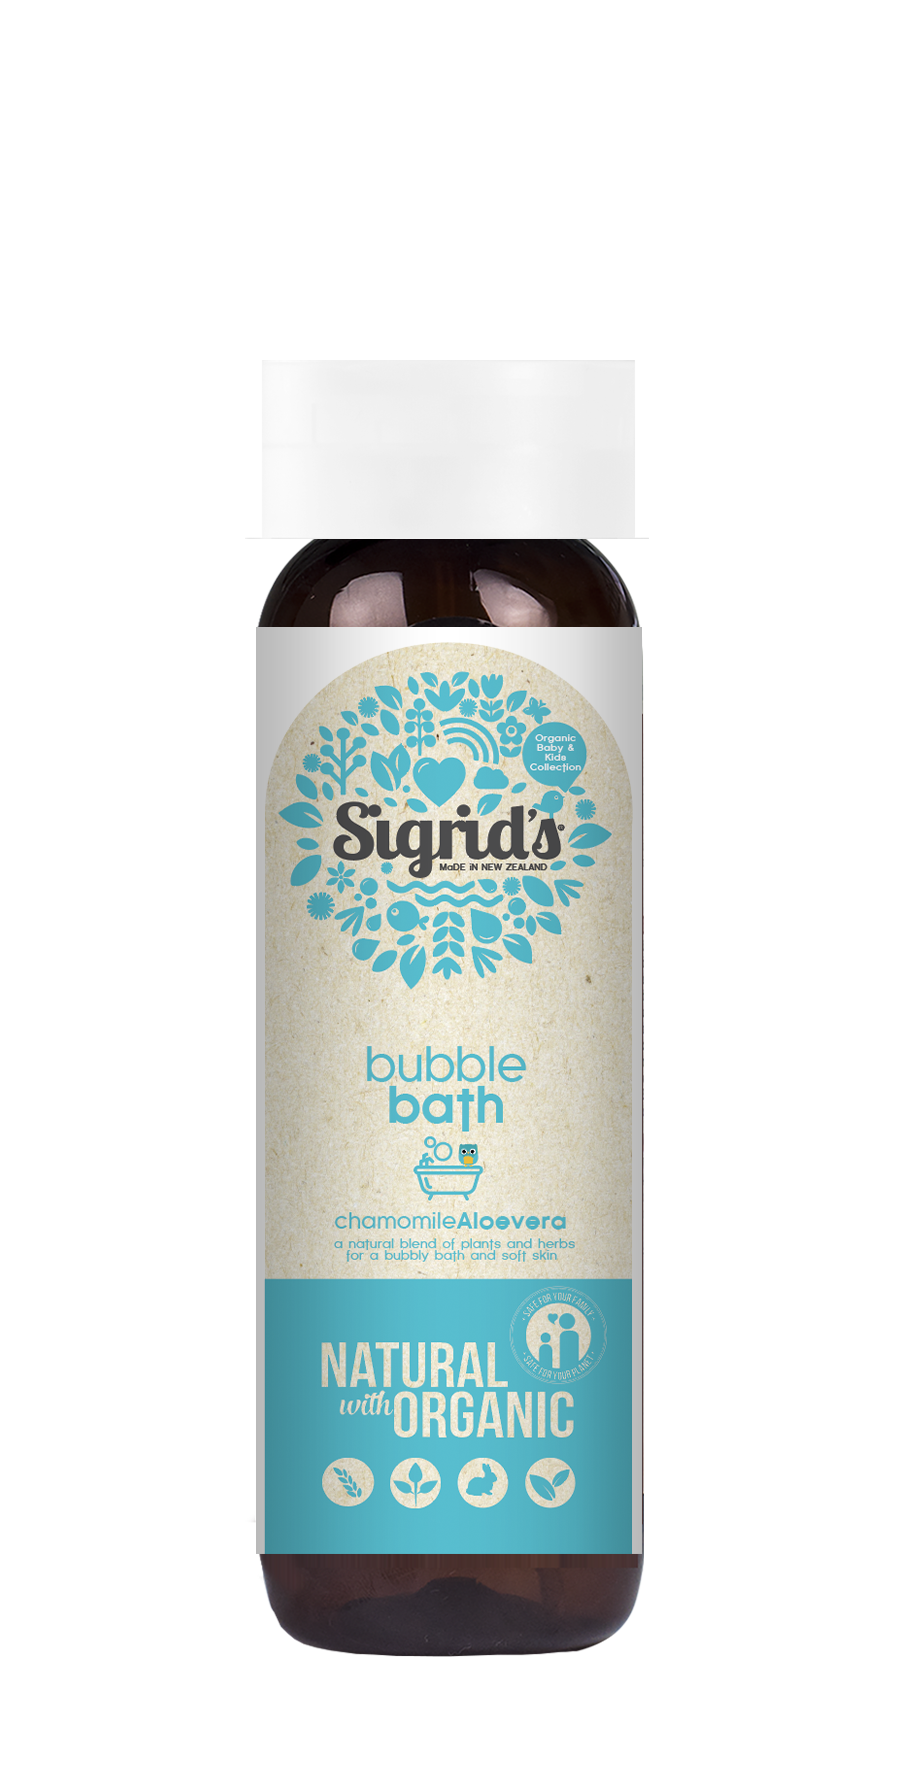 Natural Bubble Bath, with organic extracts